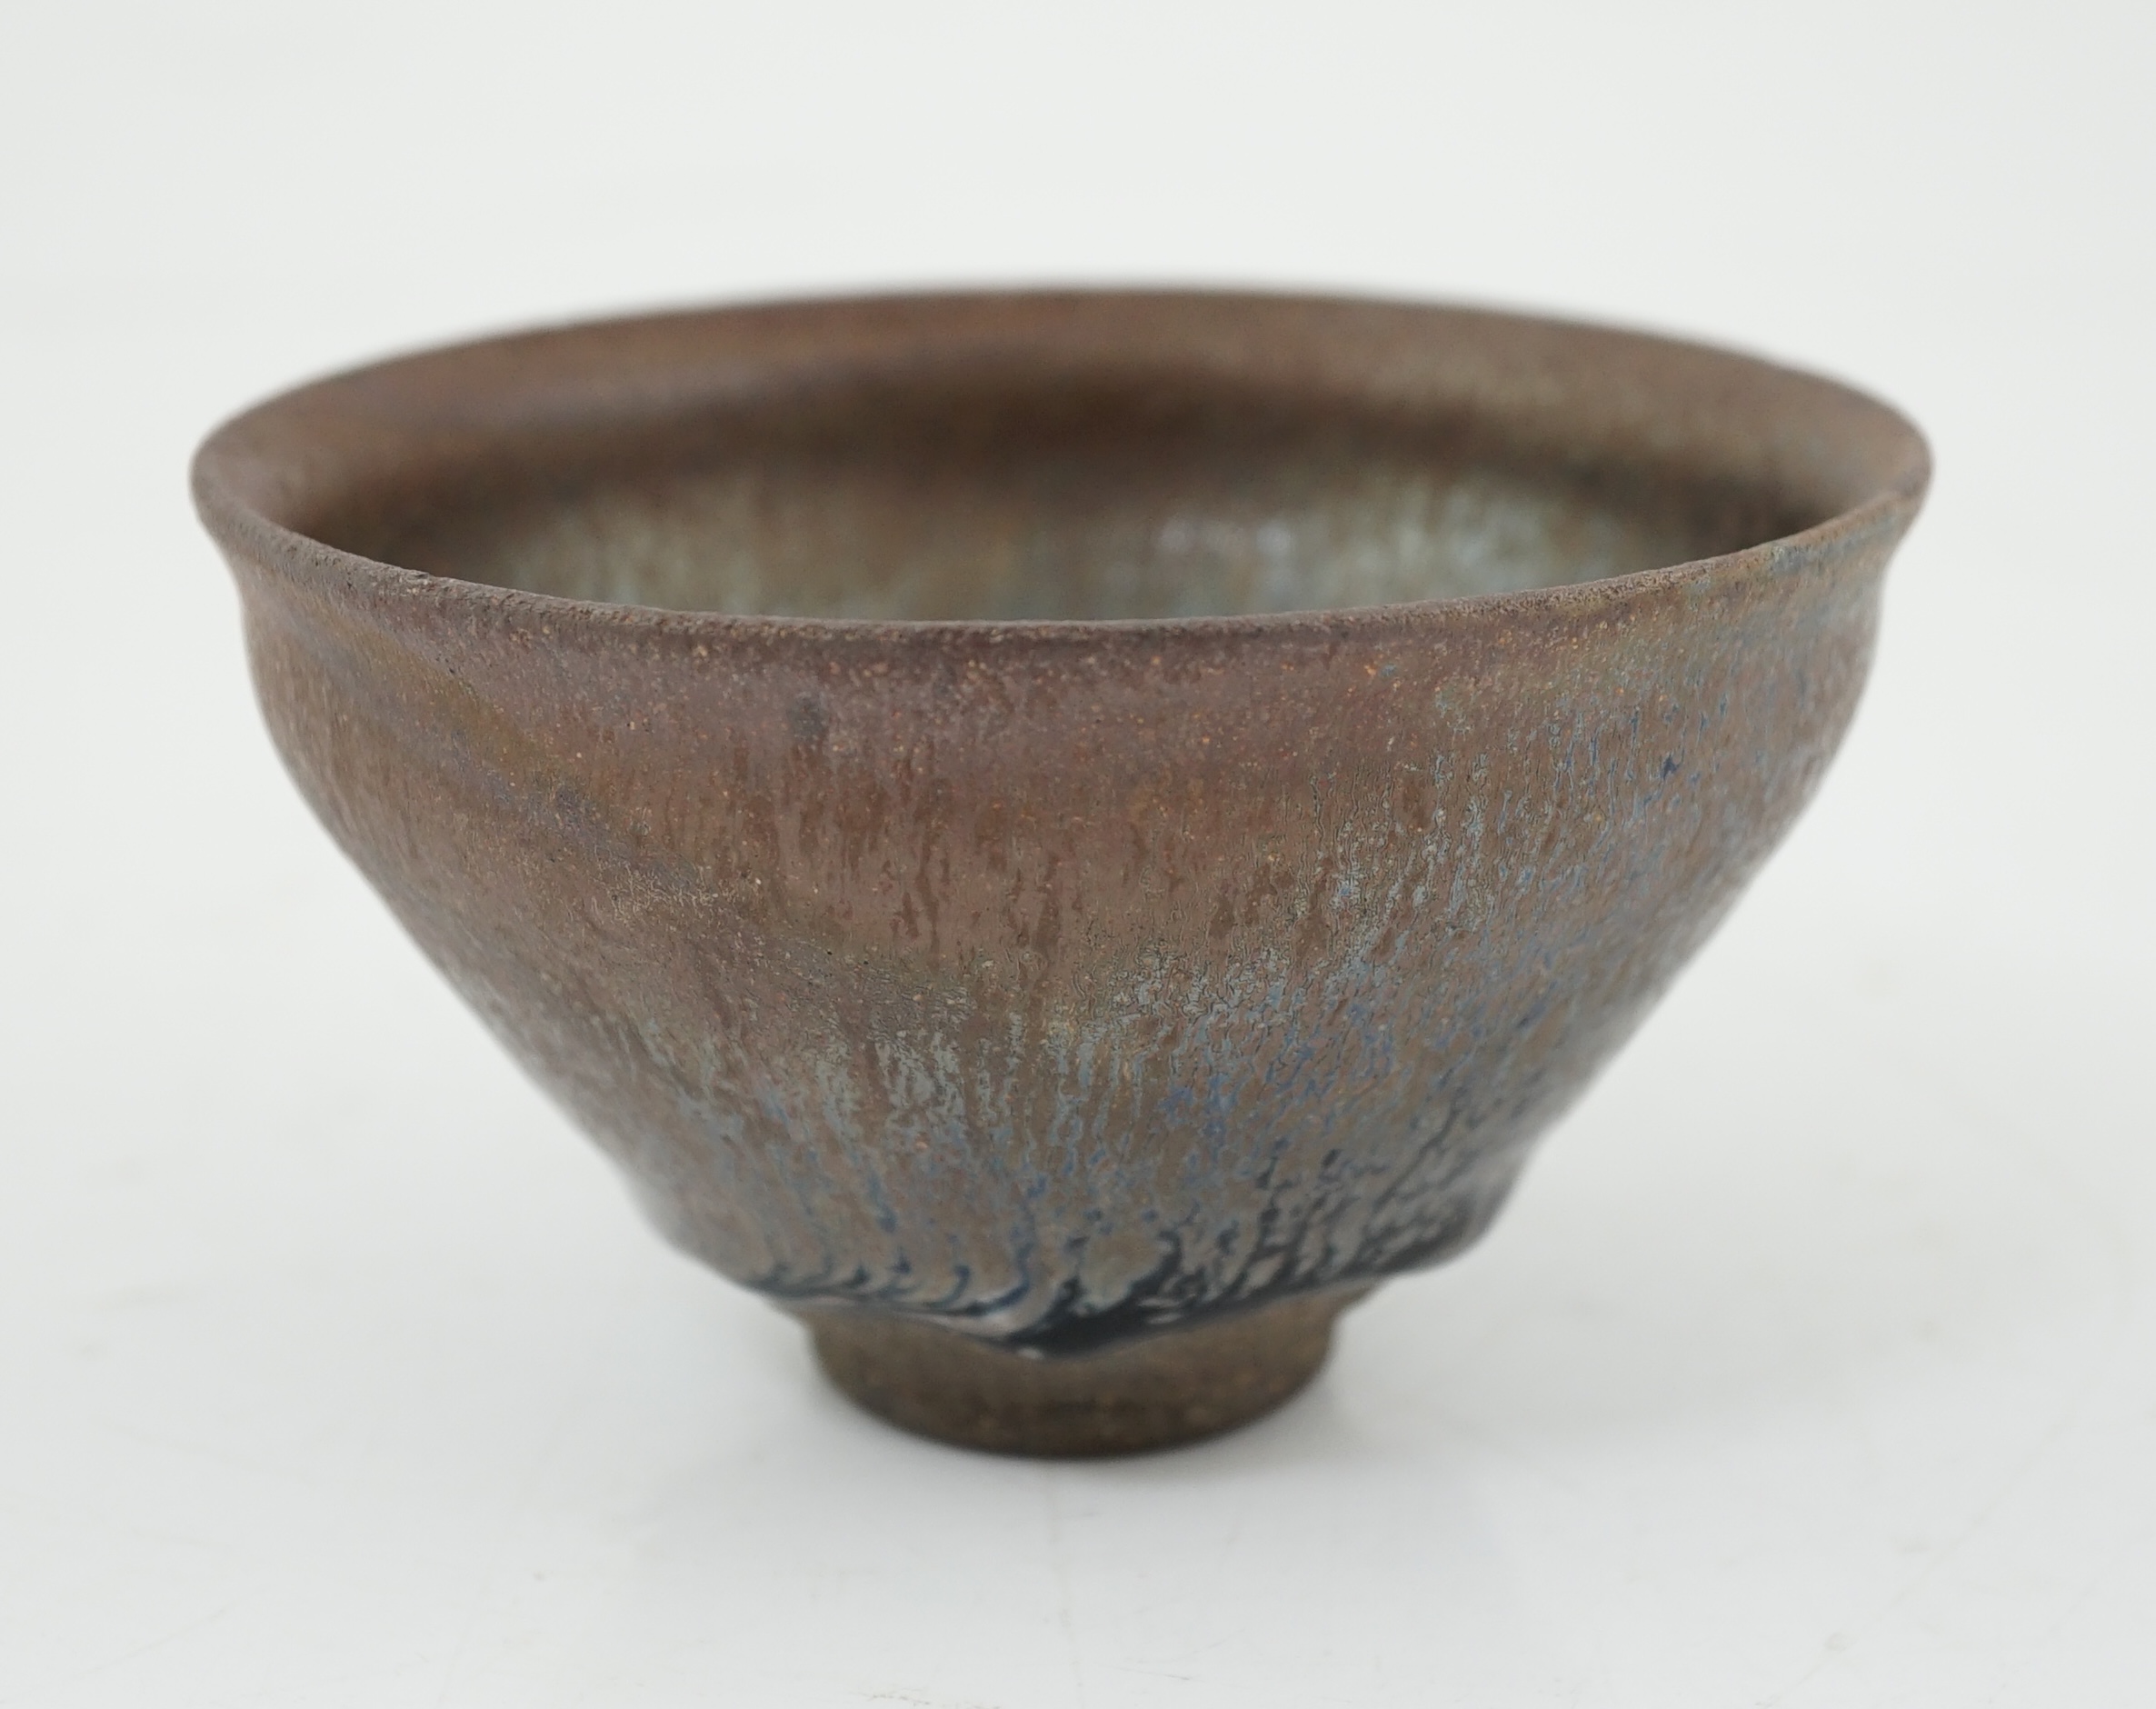 A Chinese 'hares fur' pottery bowl, Song Dynasty with a thick glaze pooling above the unglazed base, 12.2cm diameter. Provenance - Robert Ricketts collection. Condition - good